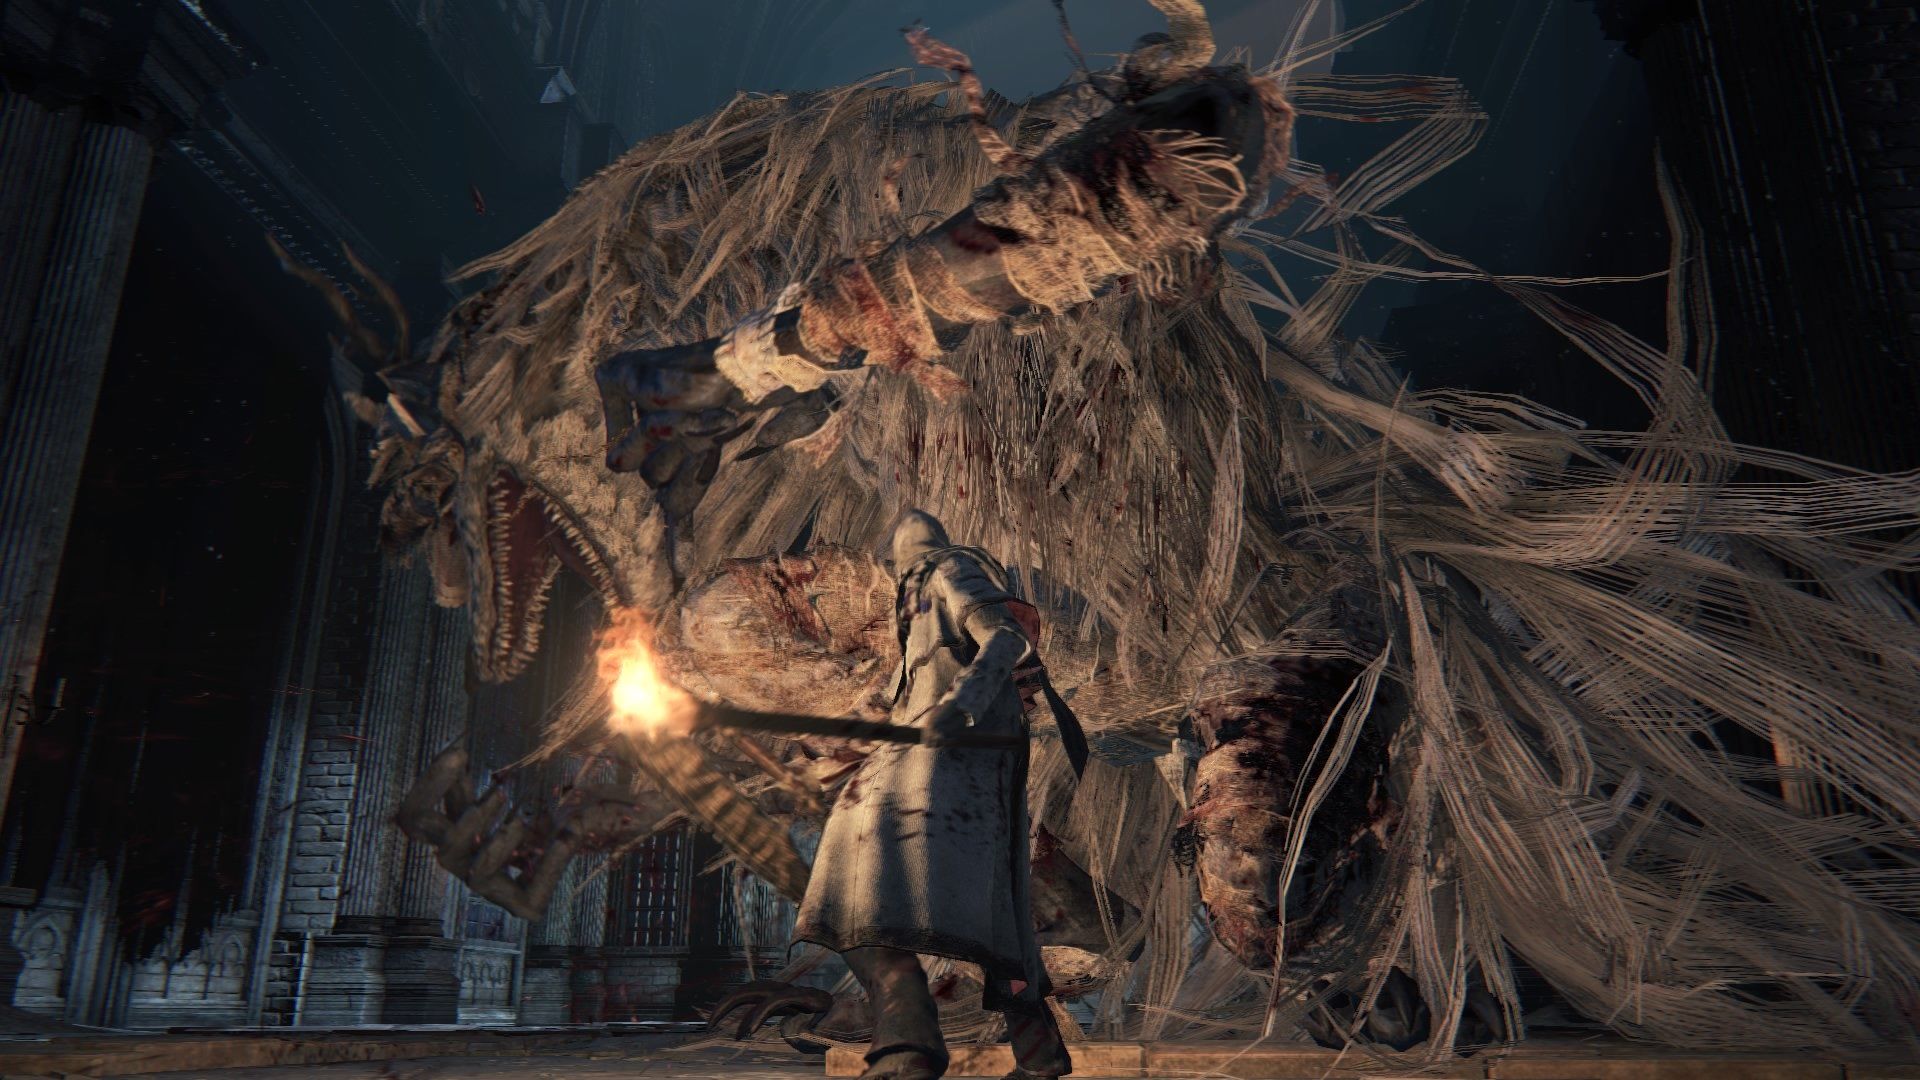 Why Bloodborne Is The Most Overrated FromSoftware Soulsborne Game